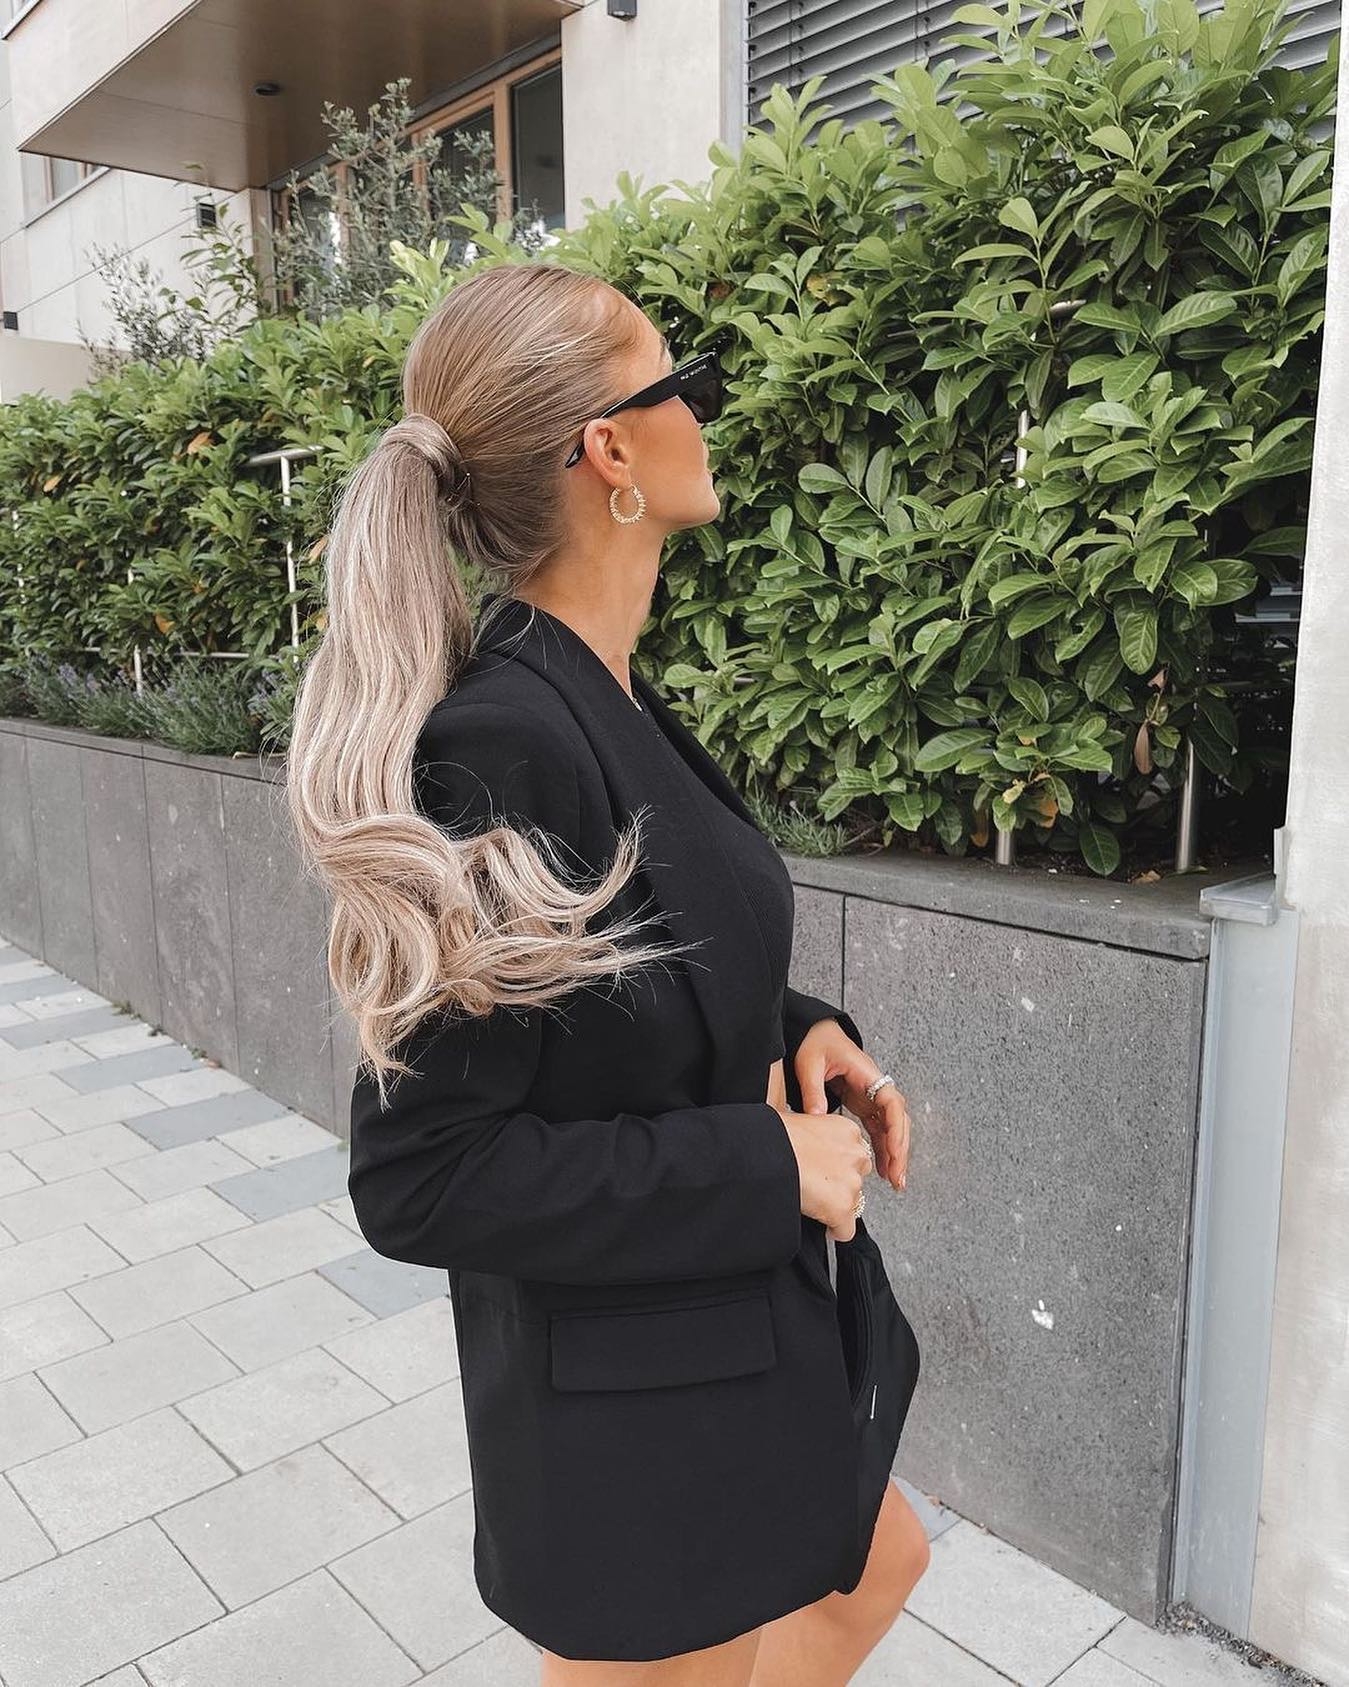 Photo from rapunzelofsweden with the caption I do my hair to stare at my own fab reflection when I walk by store windows! 👀
@stellaarhg in her Clip-in Ponytail in B5.1/7.3 Brown Ash Blonde Balayage
#rapunzelofsweden #hair #longhair #ponytail #hairextensions